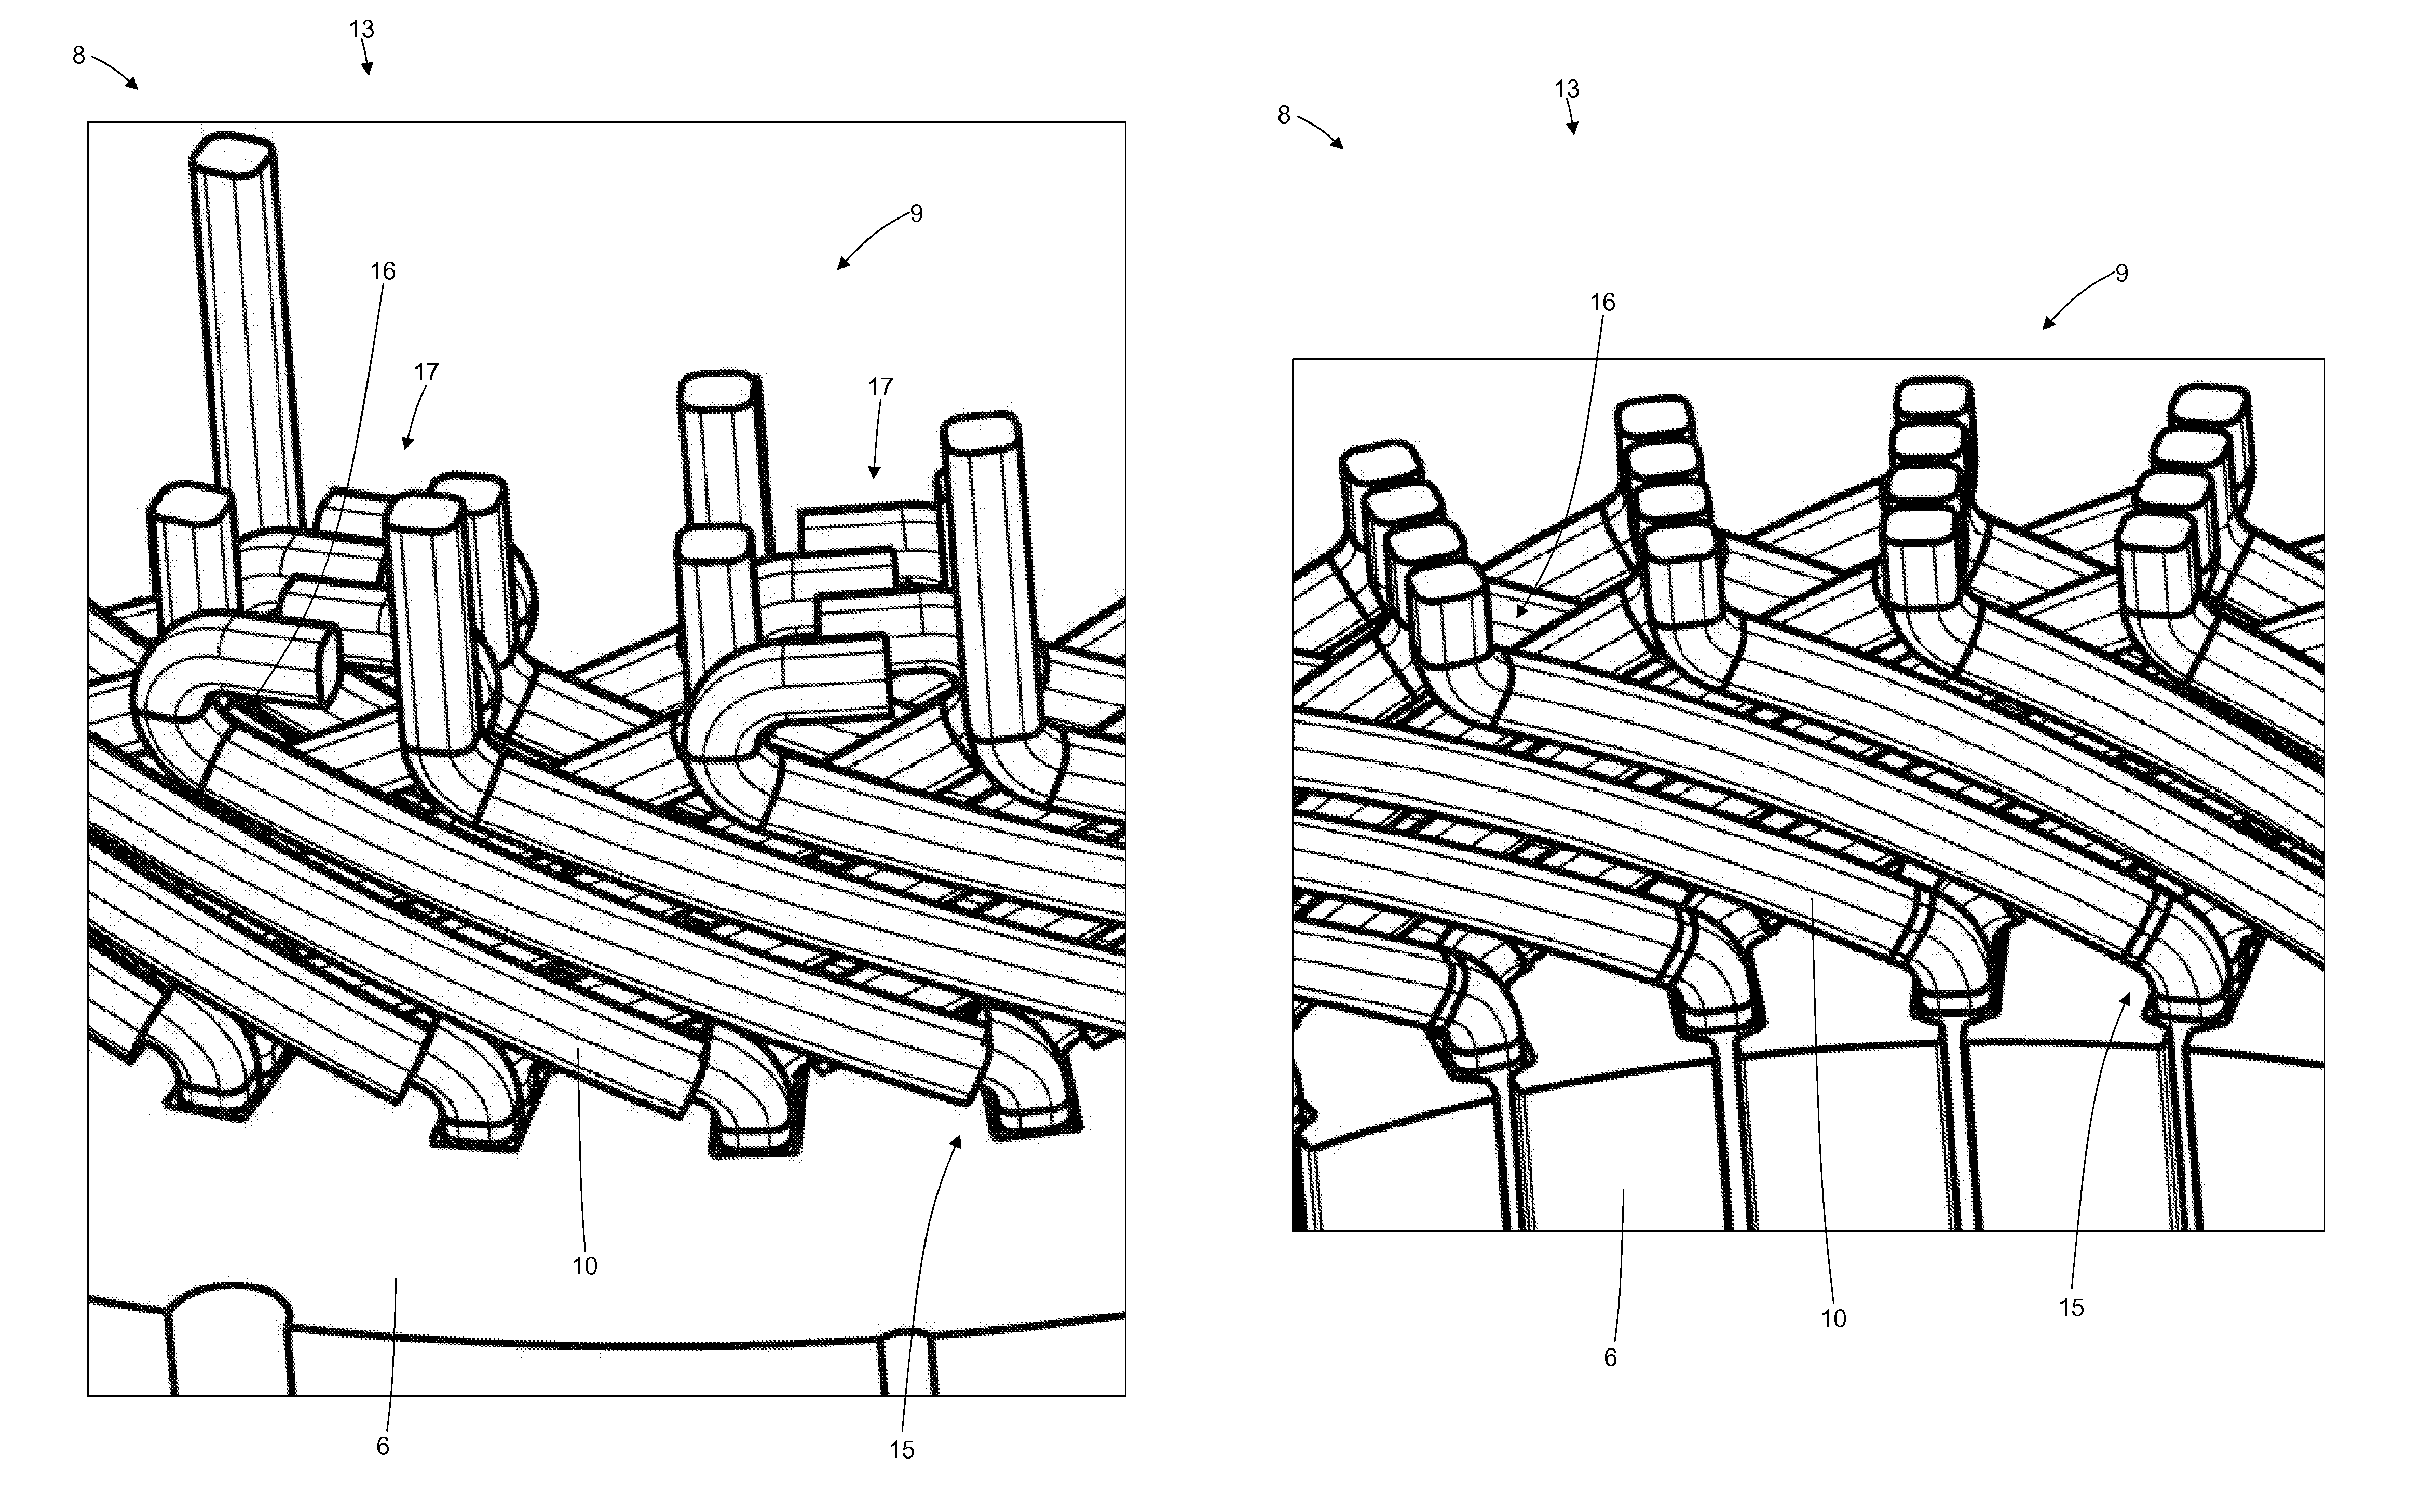 Electric machine having a stator winding with rigid bars, and related method of construction